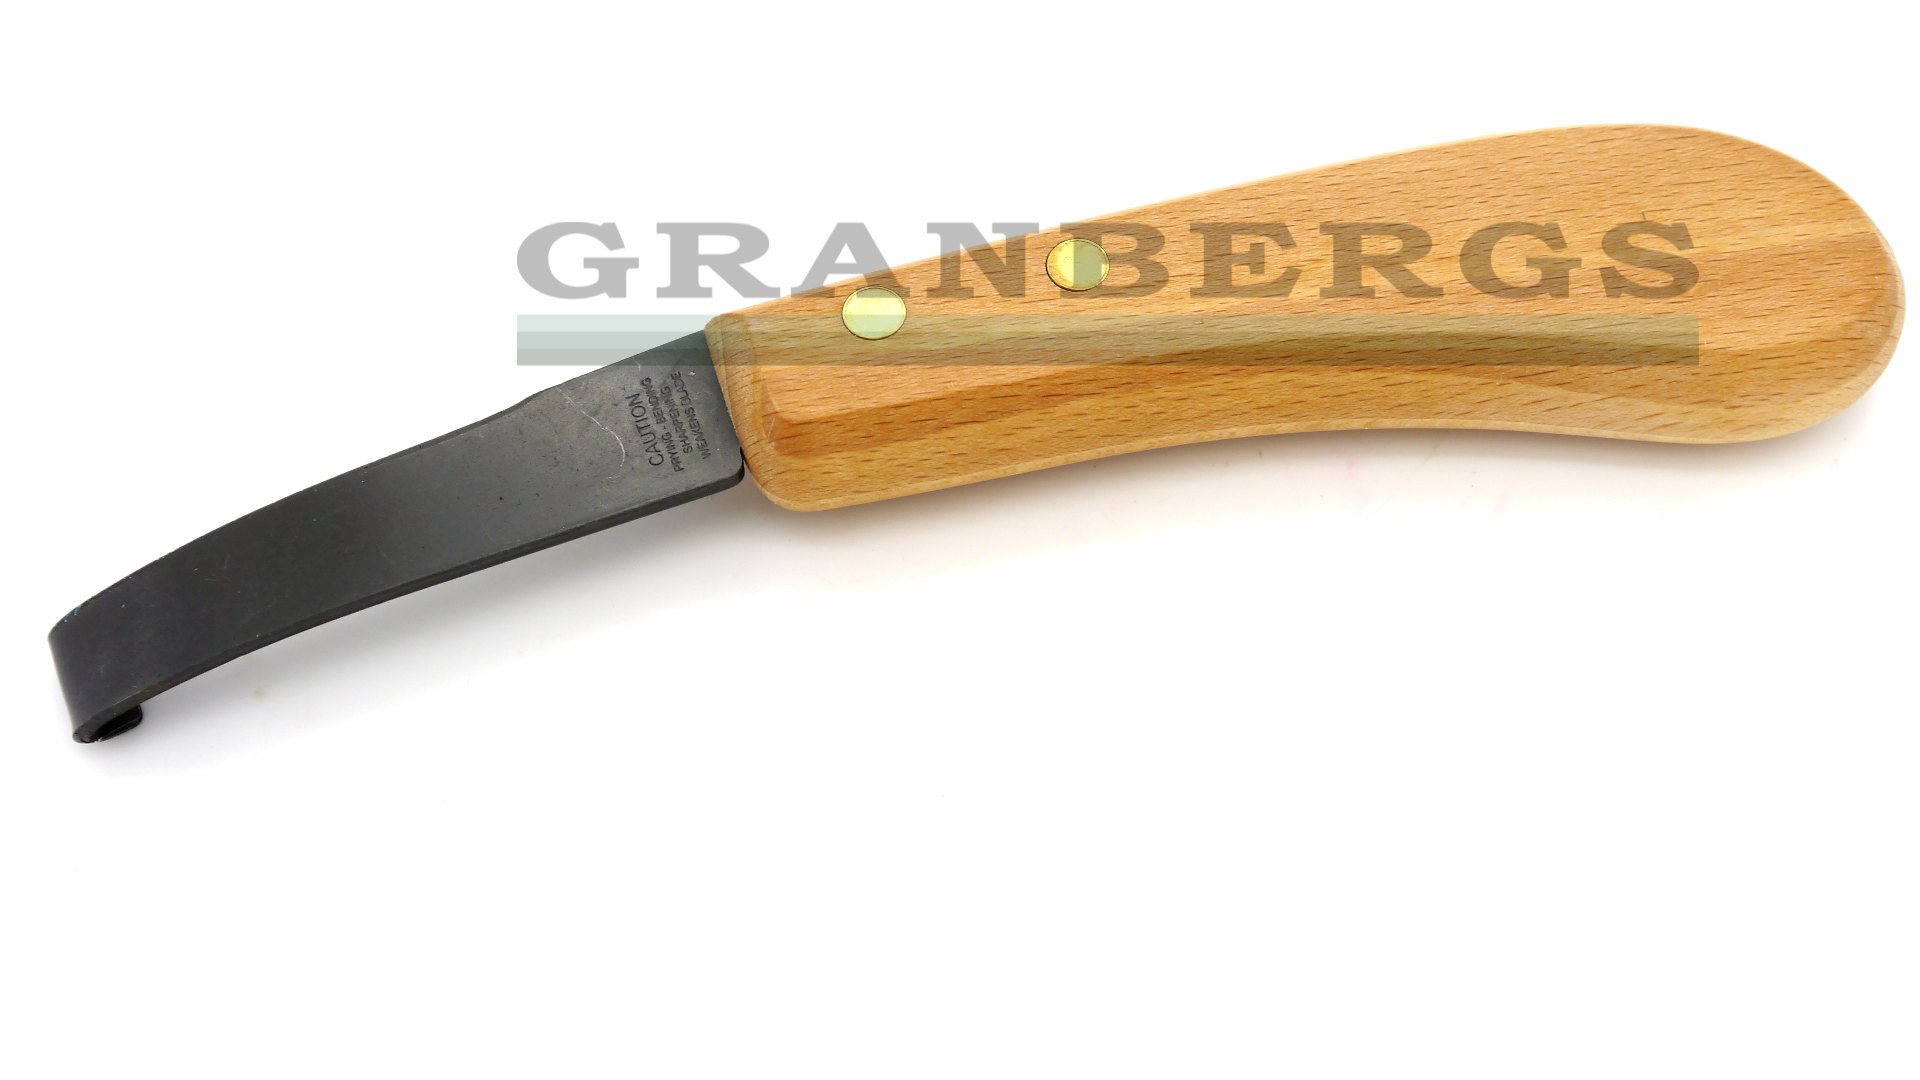 https://granbergs.com.au/getattachment/Products/Knives-Outdoors/Frosts-Mora-Equus-Farrier-s-Knife-Wide-180RH-Right/3P1120909Frosts-Mora-Equus-Farrier-s-Knife-Wide-180RH-1920p-Watermark.jpg.aspx